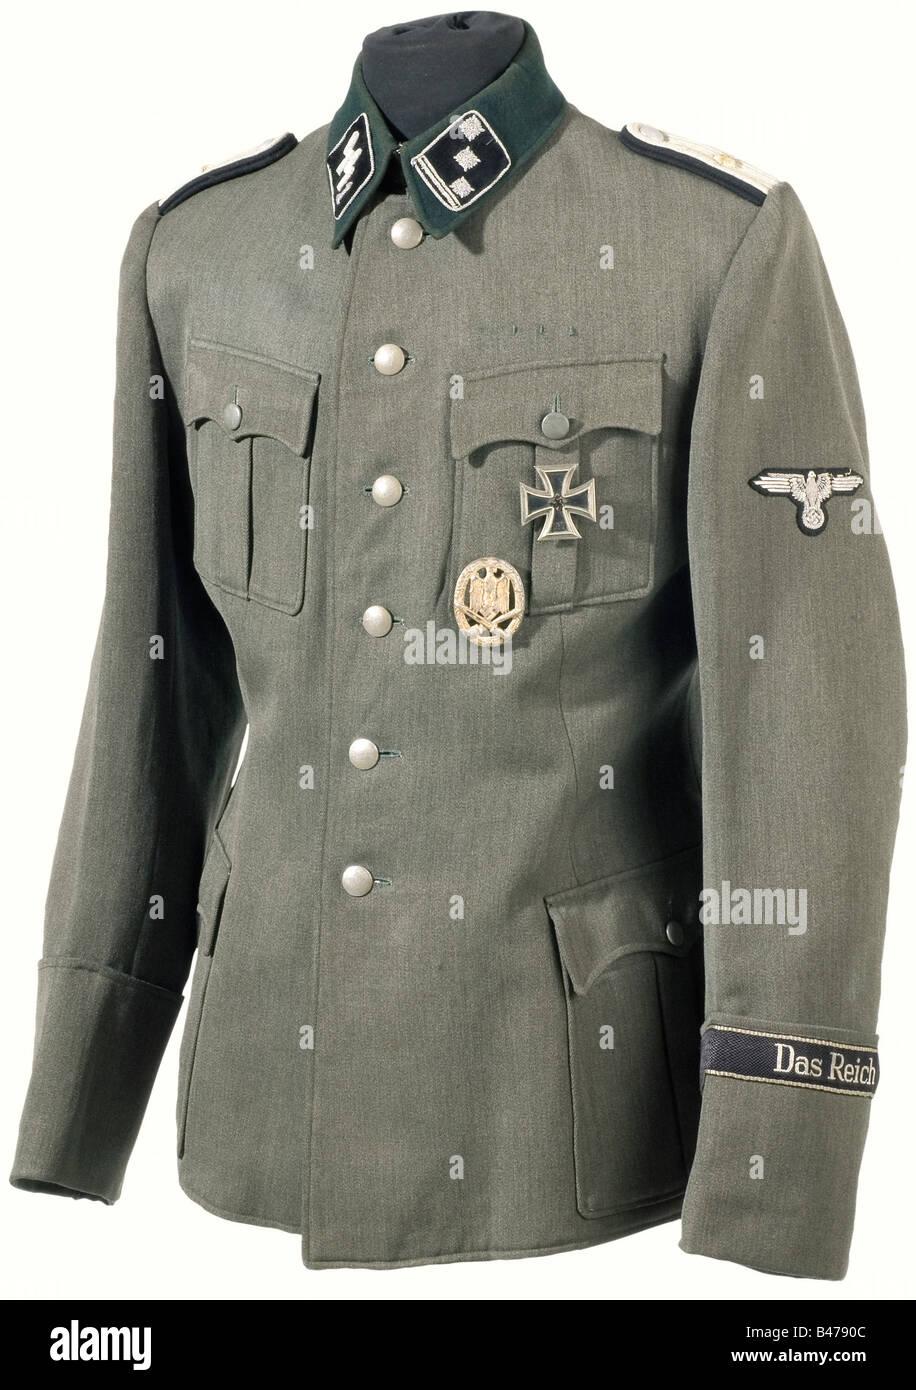 A field tunic for an Obersturmführer, of Combat Engineers. Private purchase piece, of field grey, Italian gabardine with a dark grey collar, sand coloured cotton lining, and field grey buttons. Sewn-on shoulder boards with doubled black backing and silver stars. Silver embroidered sleeve eagle (signs of wear). Silver woven BeVo sleeve band, 'Das Reich' in the flat wire version. The General Assault Badge and the Iron Cross 1st Class are pinned on to the tunic. There is a separate pair of museum-made, proper collar panels with a '1' added in silver embroidery. hi, Stock Photo